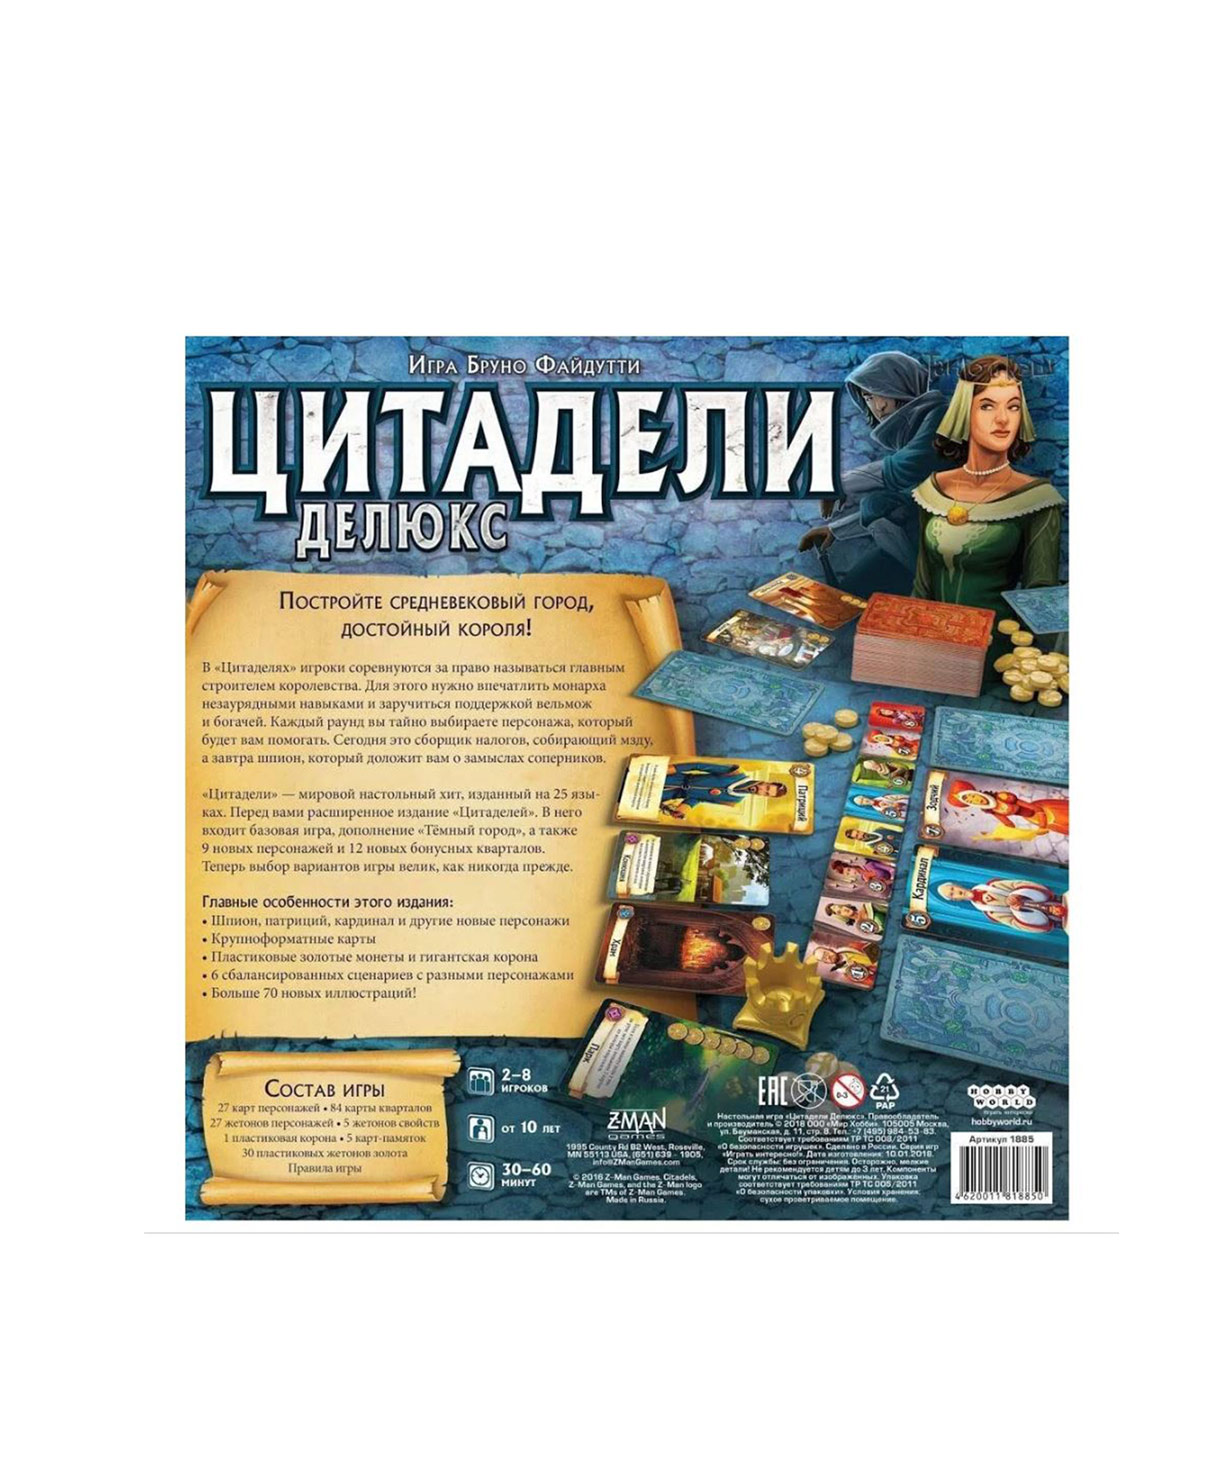 Game «Tab Game» Citadel Deluxe